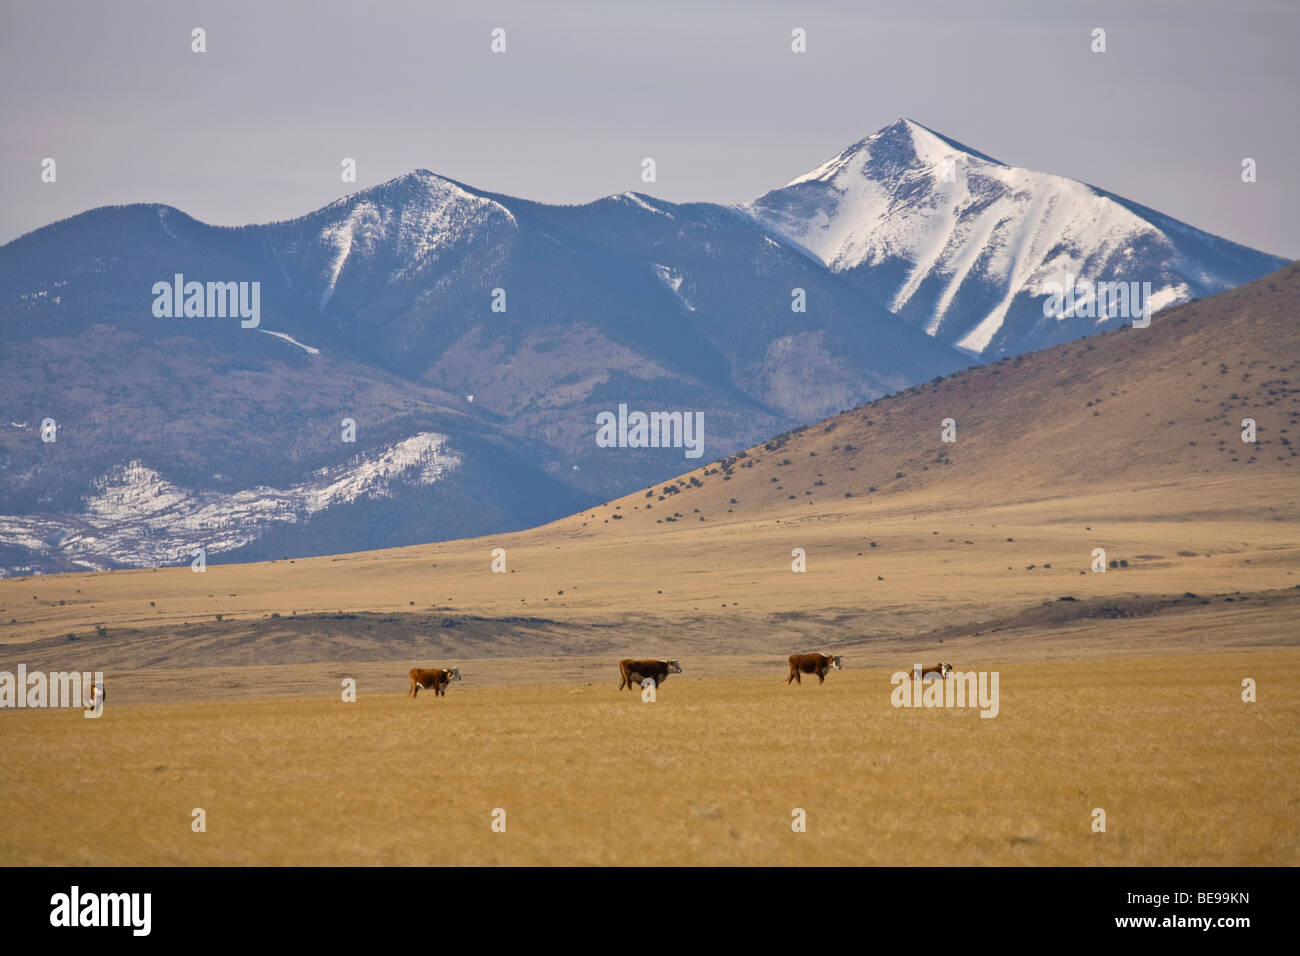 Cattle graze on Babbitt Ranch with snowy San Francisco Peaks in distance, view north of Flagstaff, Arizona, USA Stock Photo